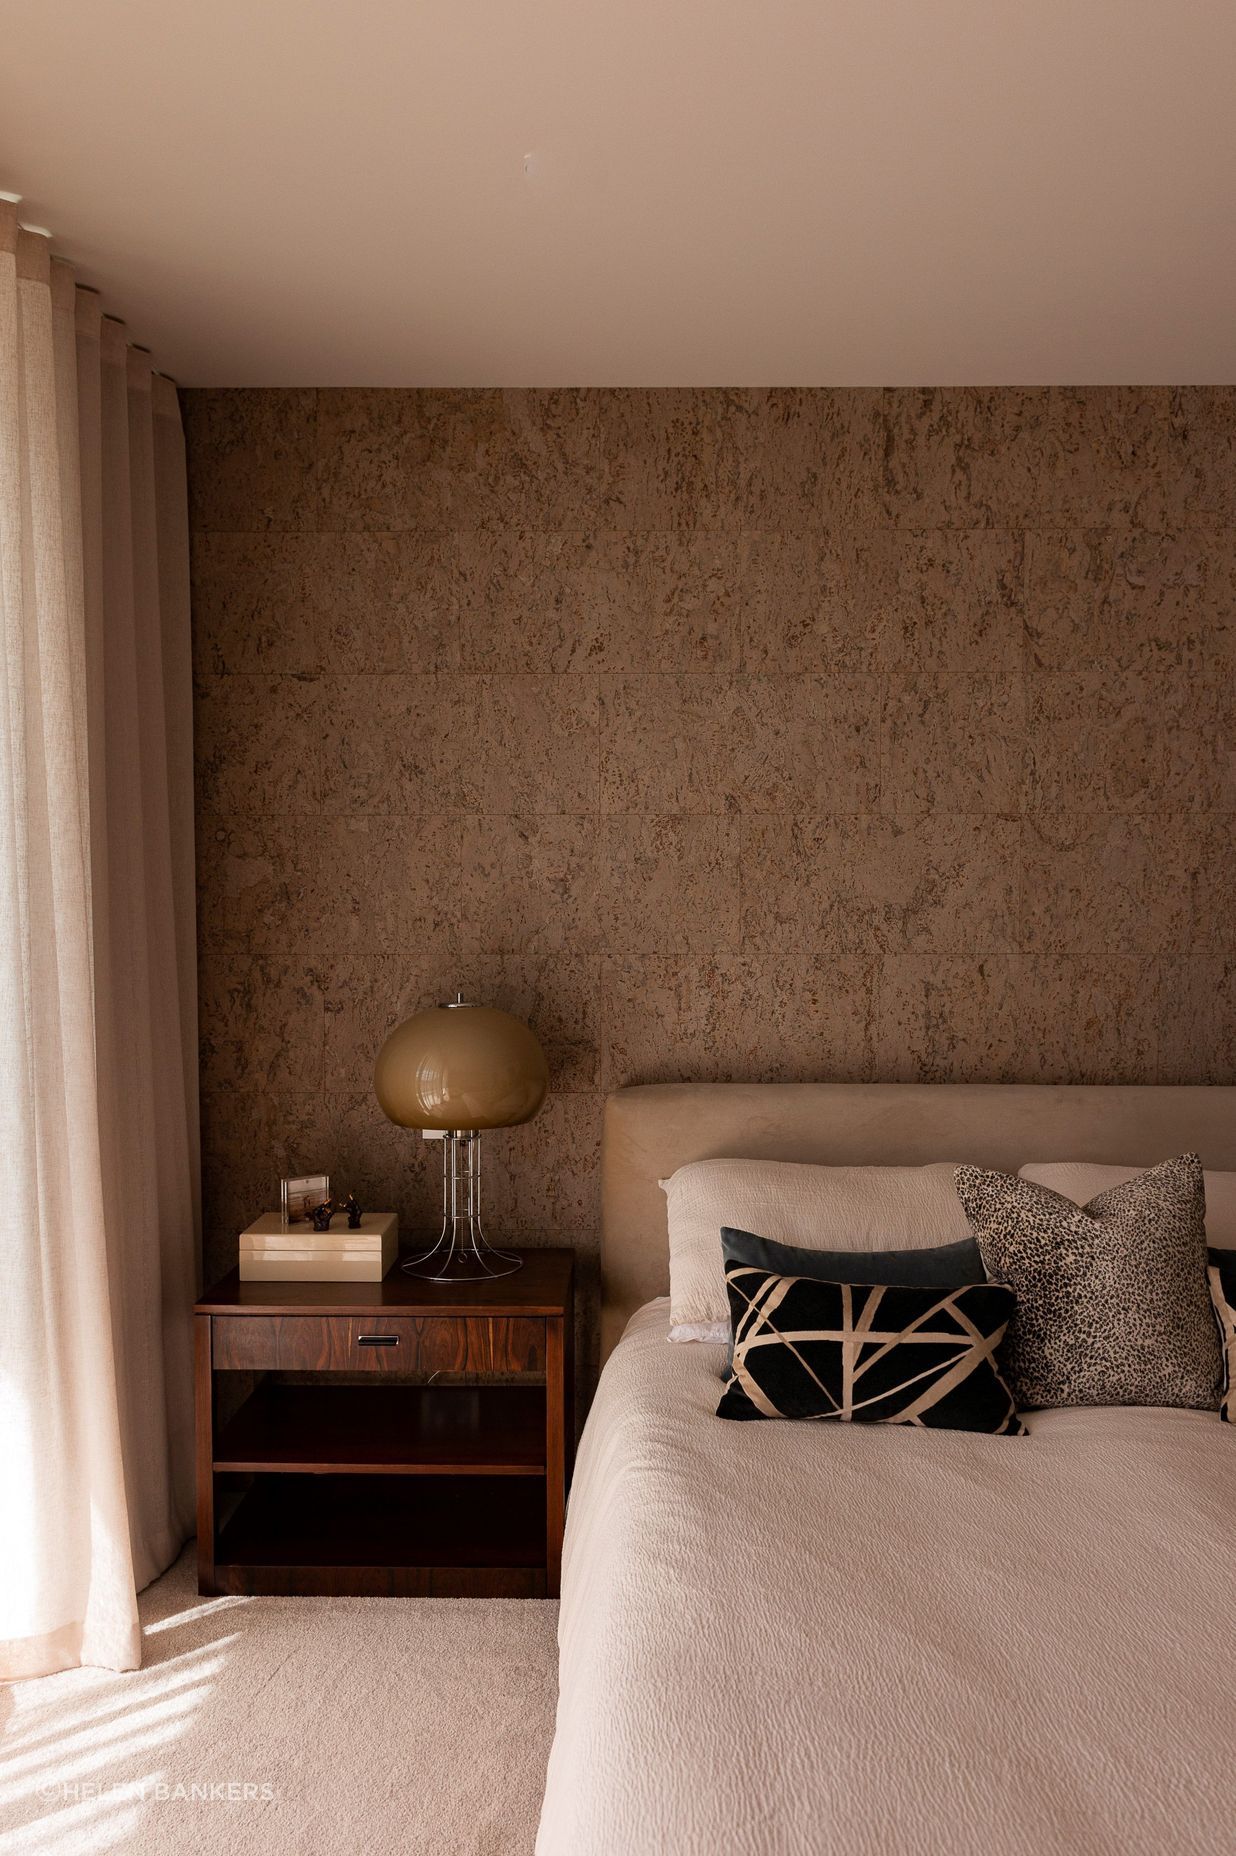 The cork feature wall brings warmth and texture to the bedroom.